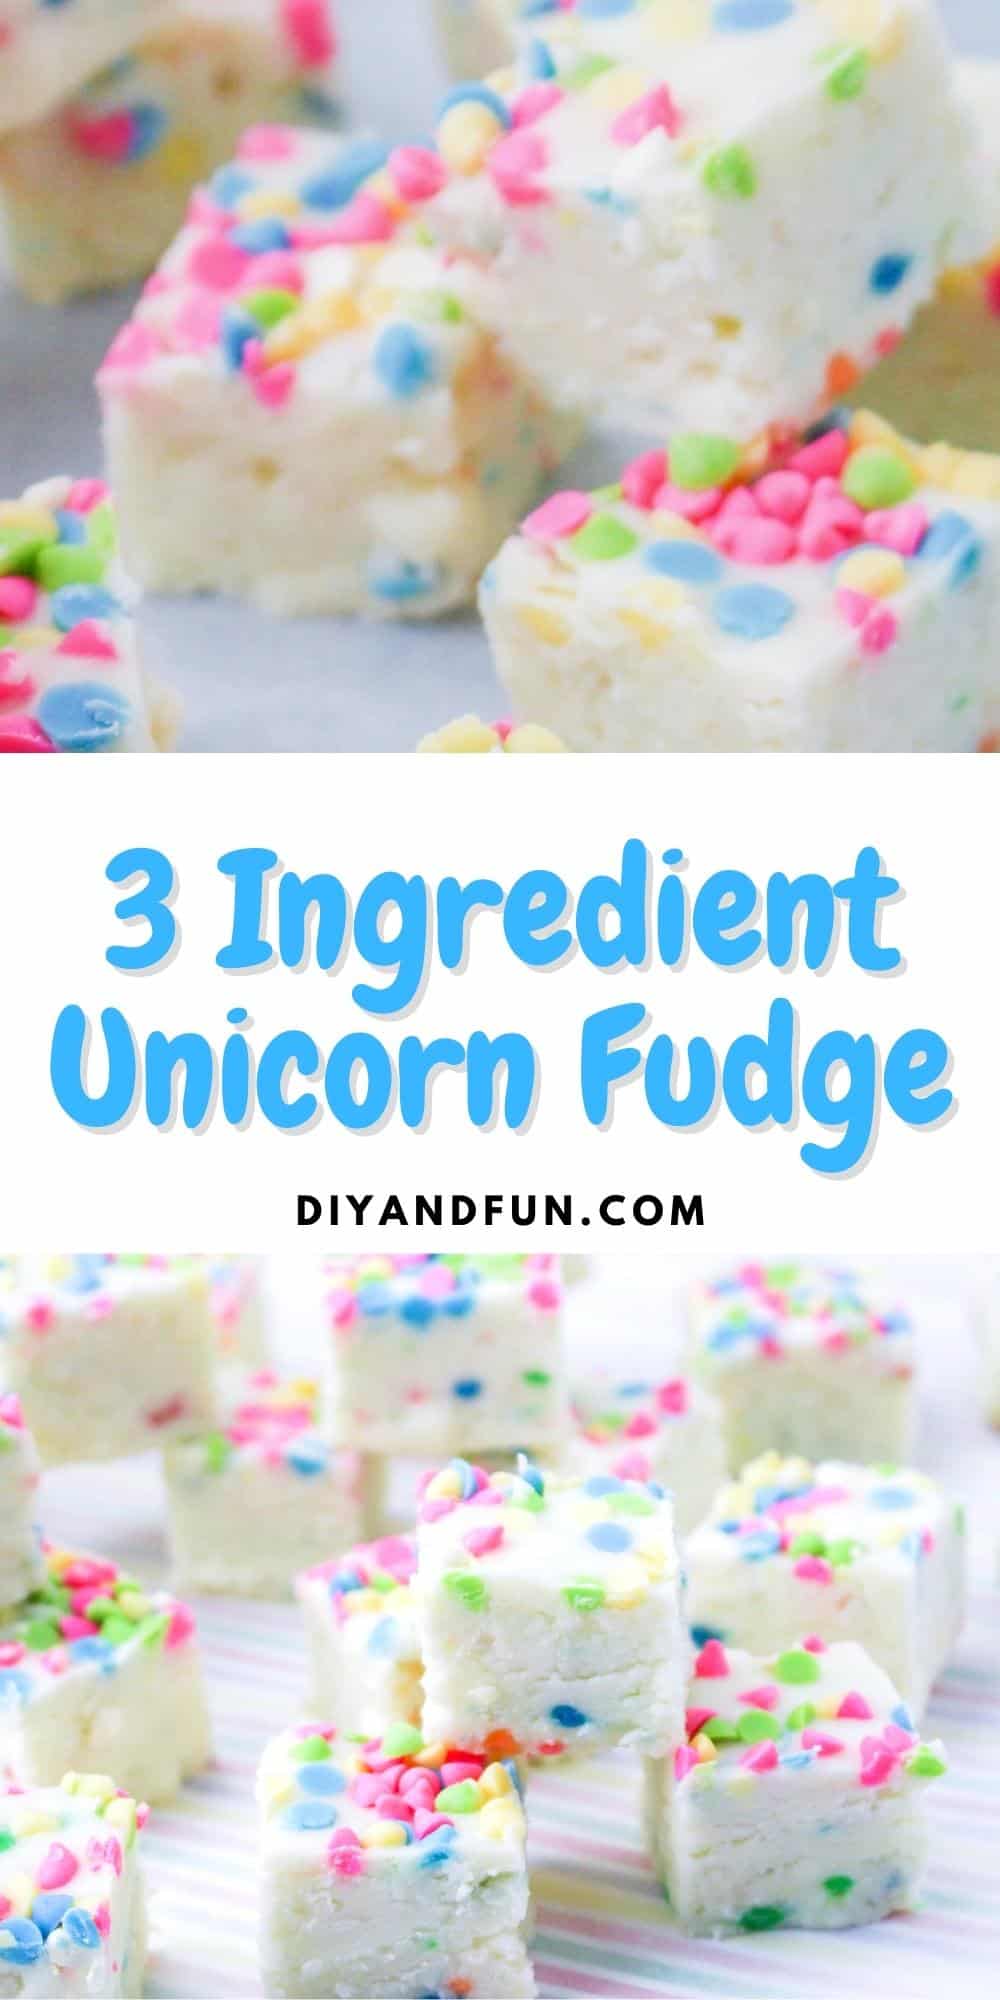 3 Ingredient Unicorn Fudge, a simple and tasty dessert or snack recipe idea for colorful and fun fudge inspired by unicorns.